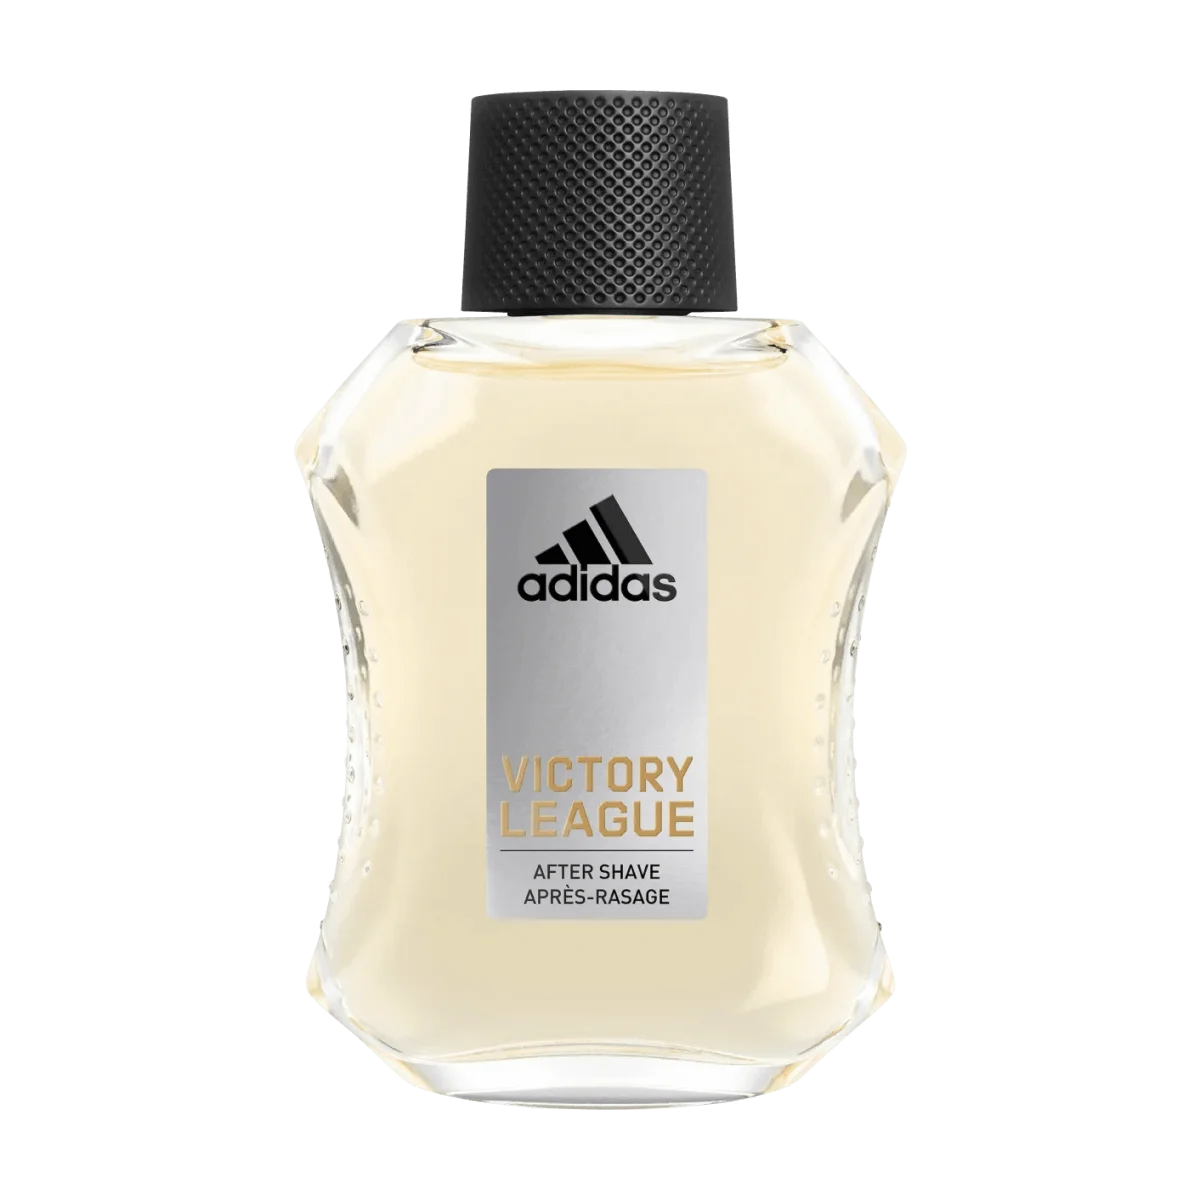 Adidas After Shave Victory League, 100 ml